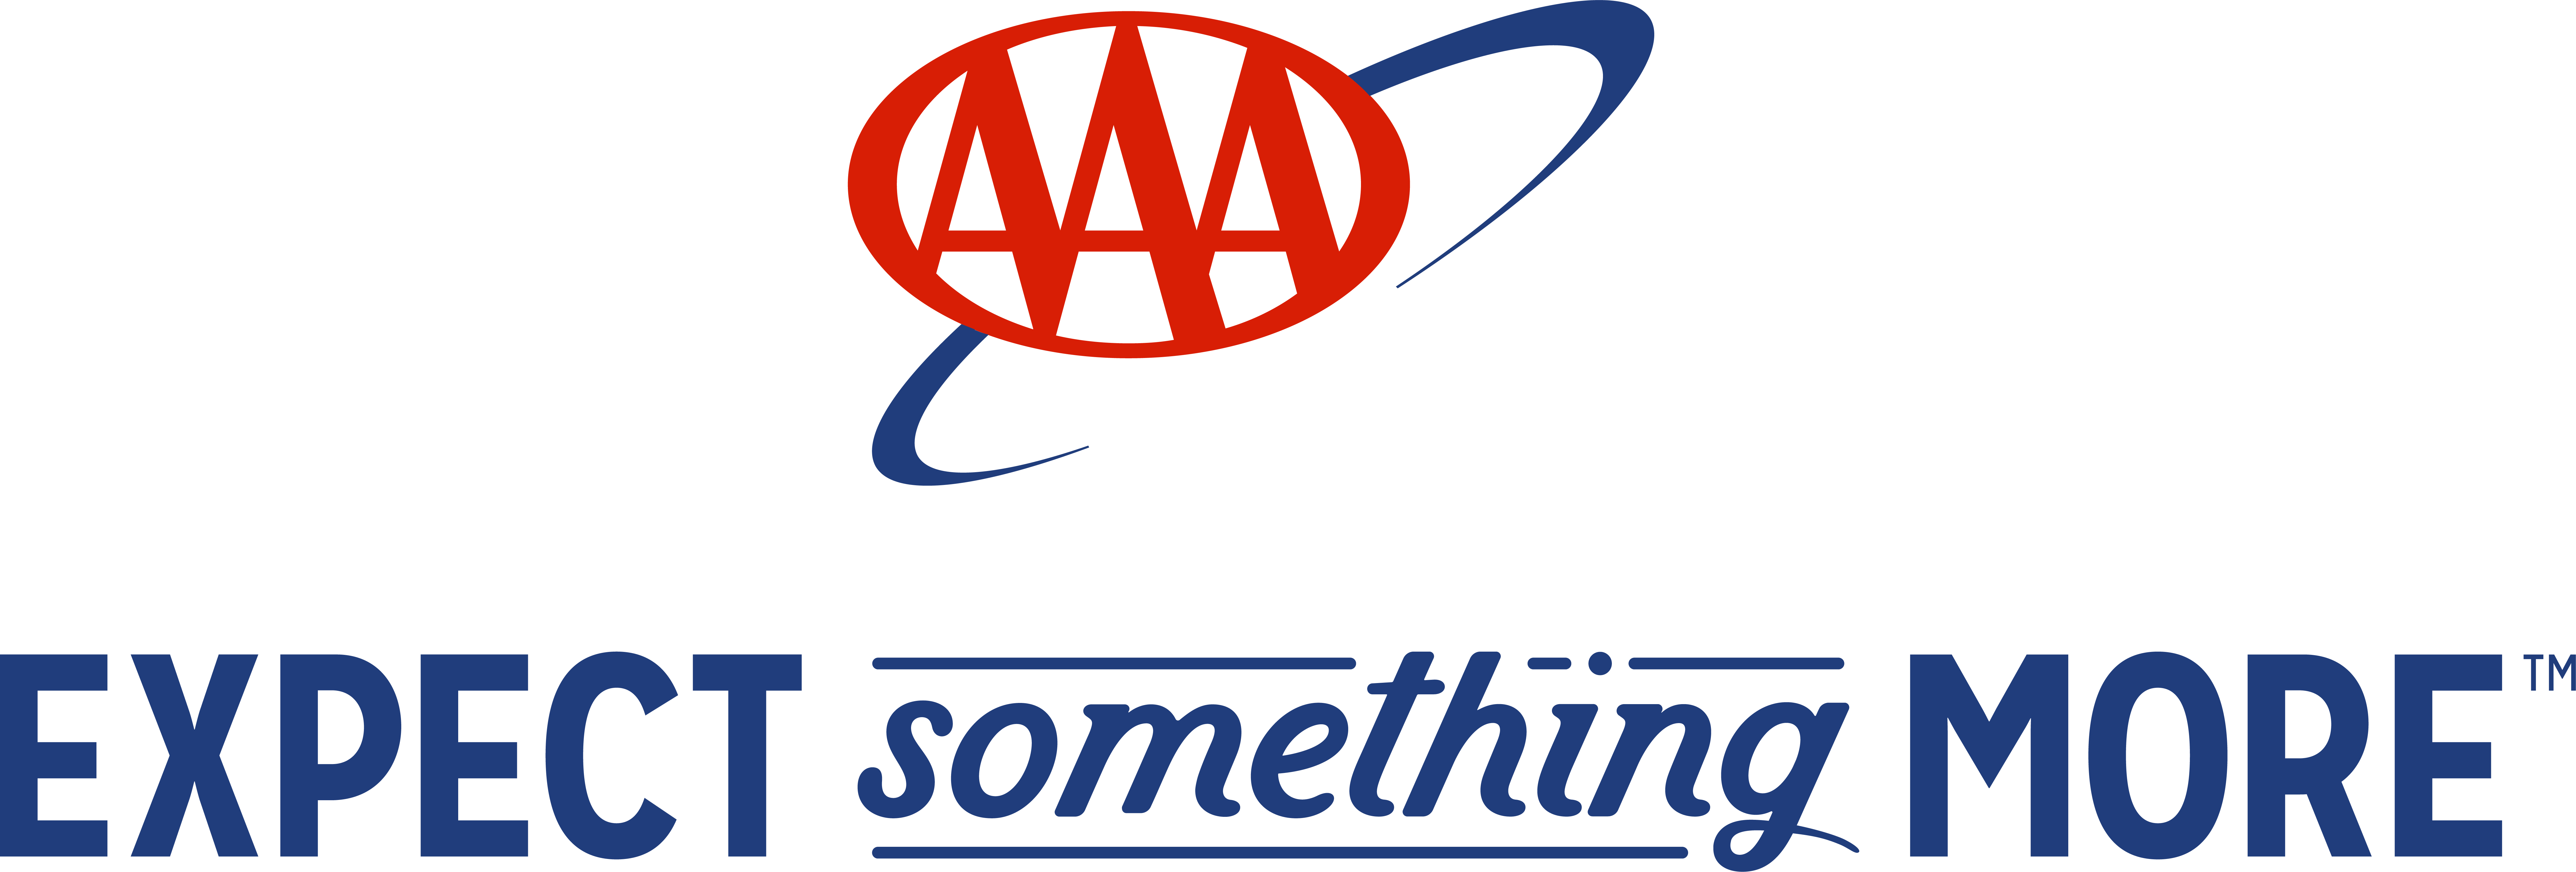 AAA_ExpectSomethingMore_FullColorRGBCentered